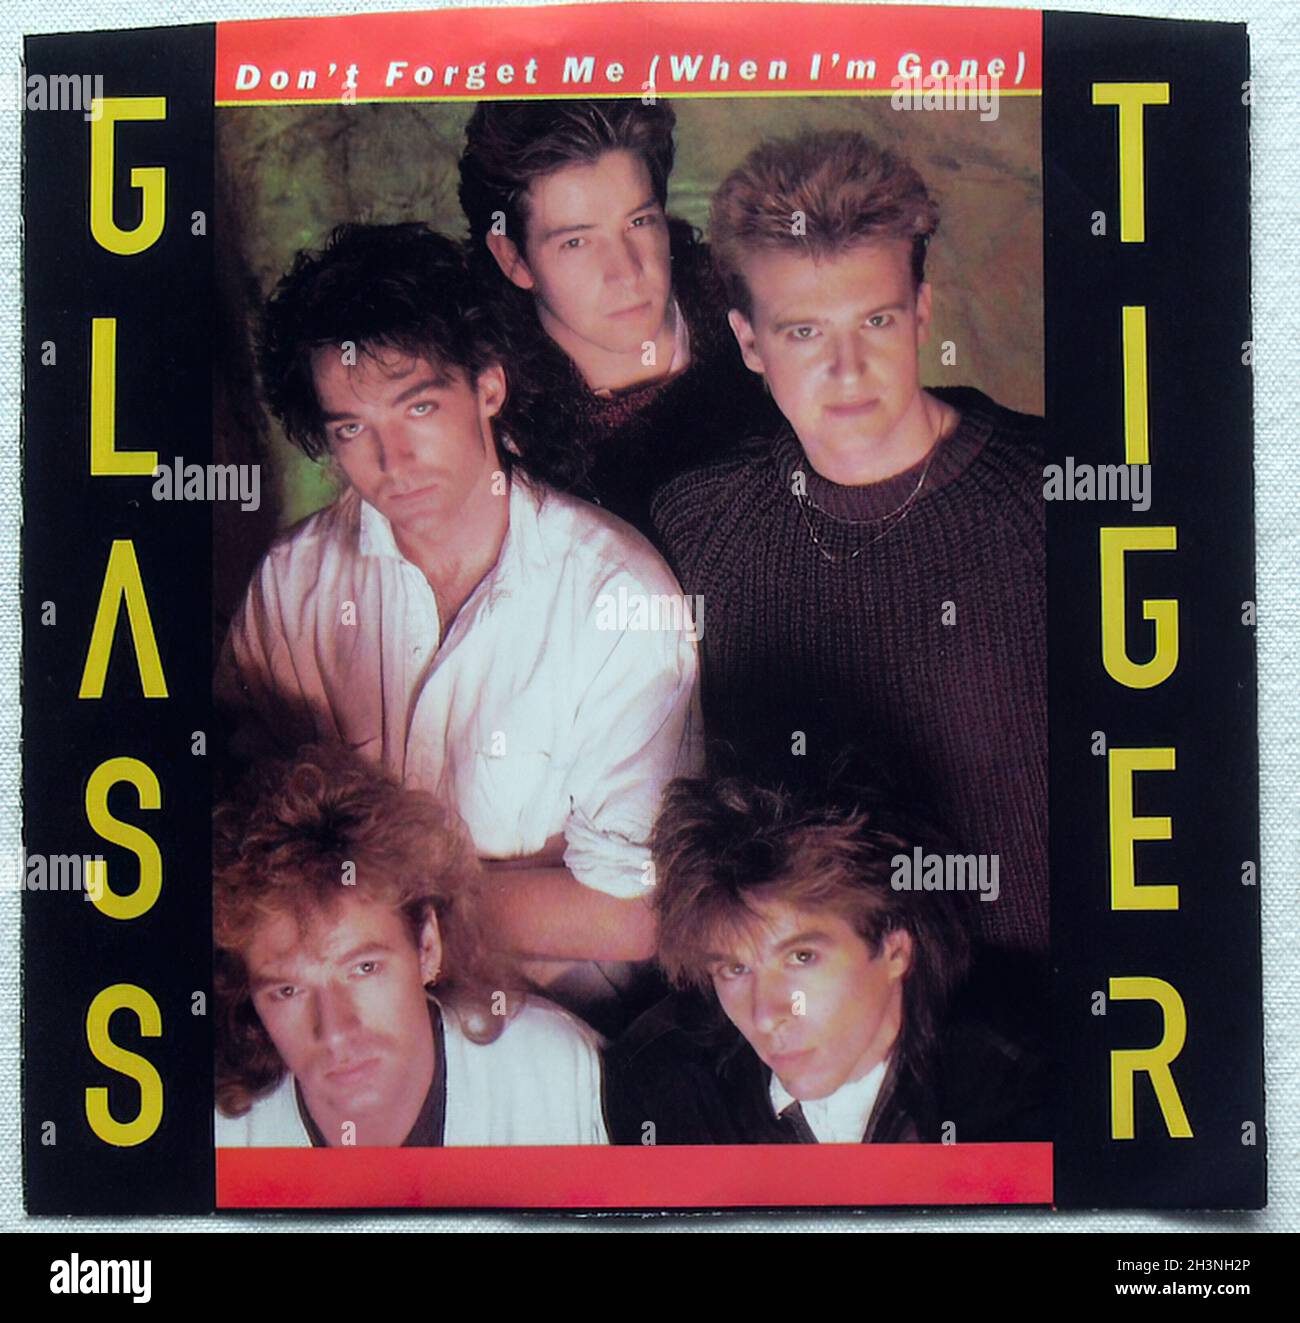 1987 Glass Tiger Don't Forget Me 7 Inch Single 45 Rpm Record Sleeve Cover Graphics 1980s Stock Photo